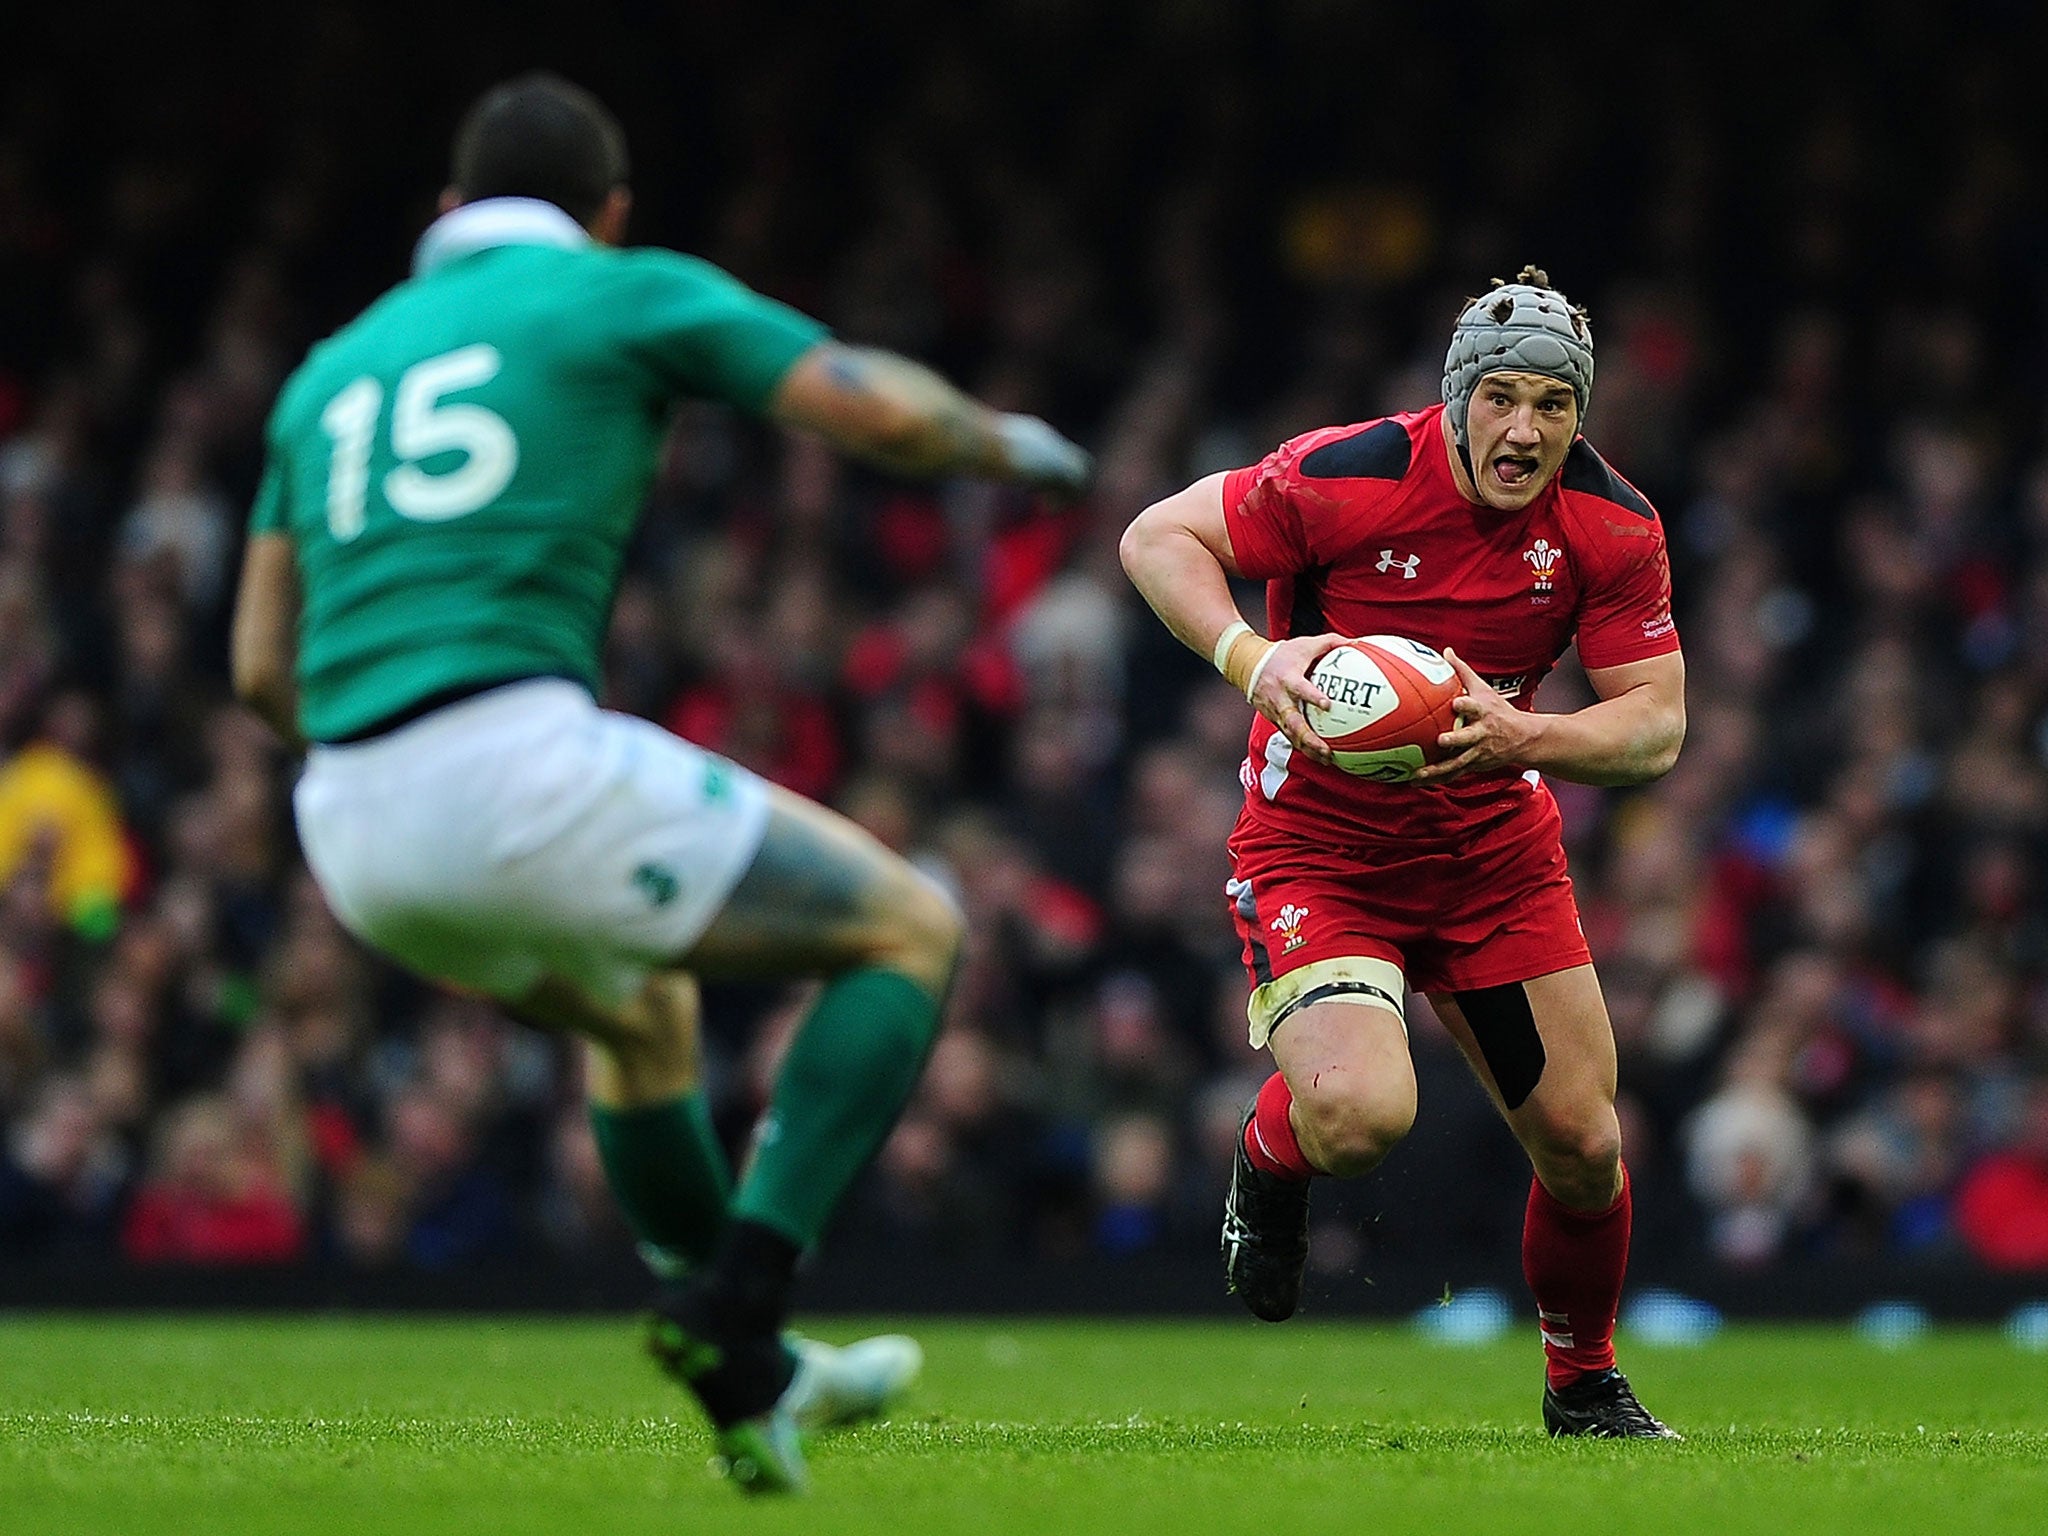 Jonathan Davies will return to the Wales side to face Ireland after missing the World Cup